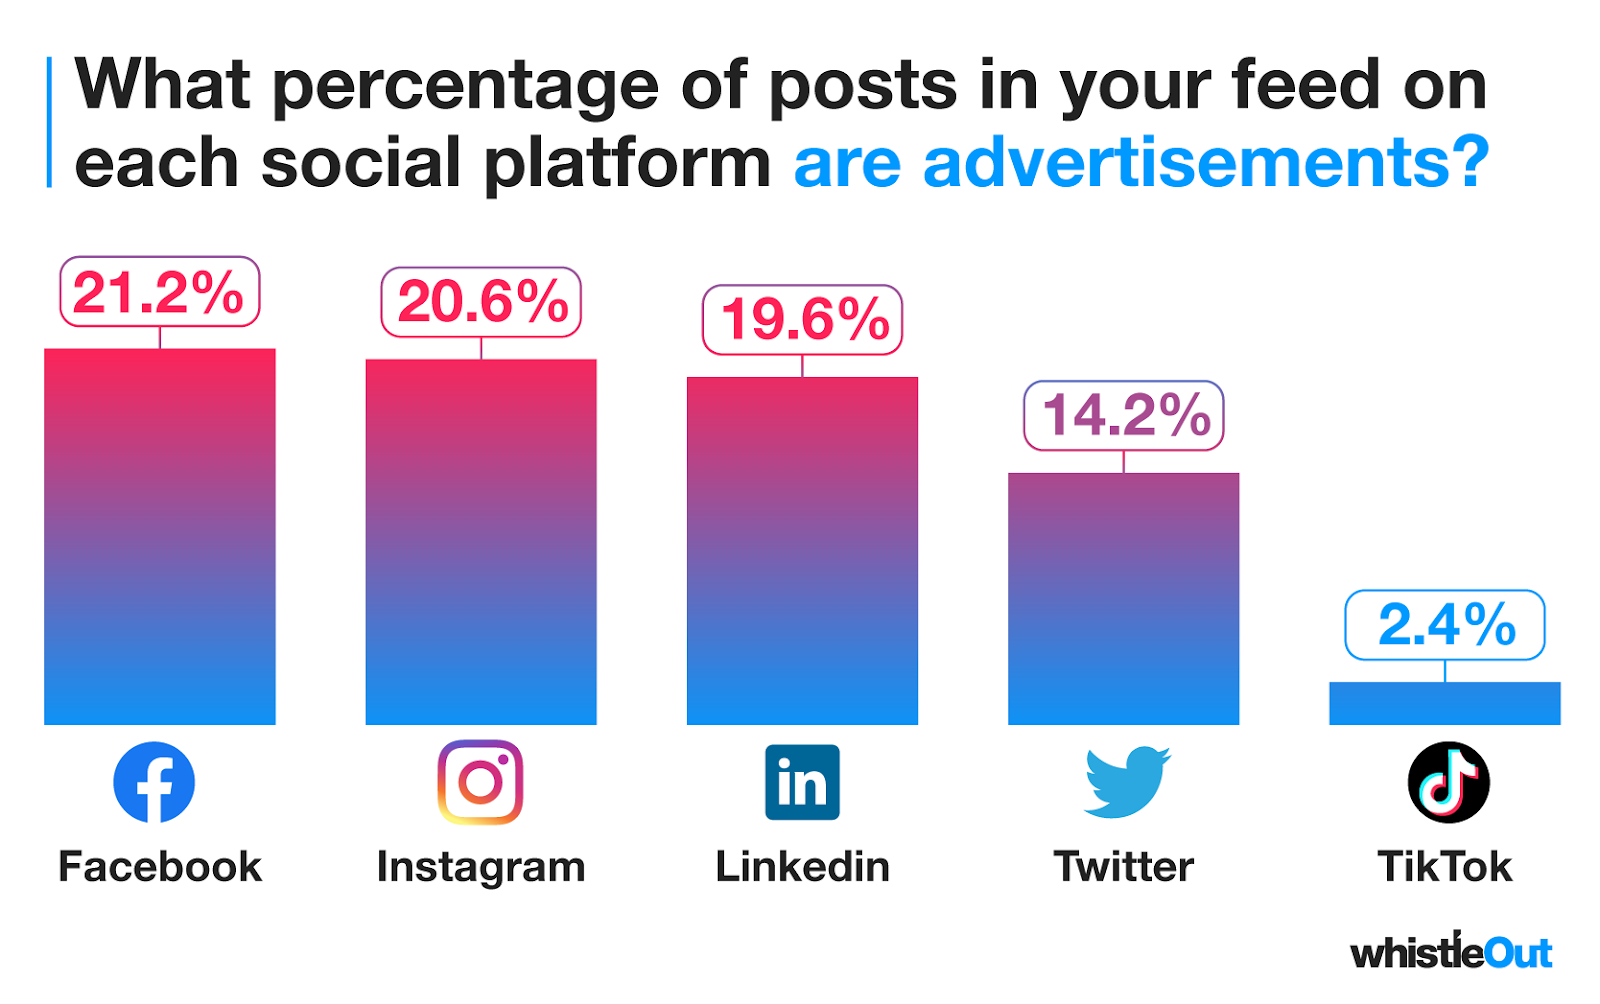 what percentage of posts in users feed on Facebook, Instagram, LinkedIn, Twitter and TikTok are advertisements?